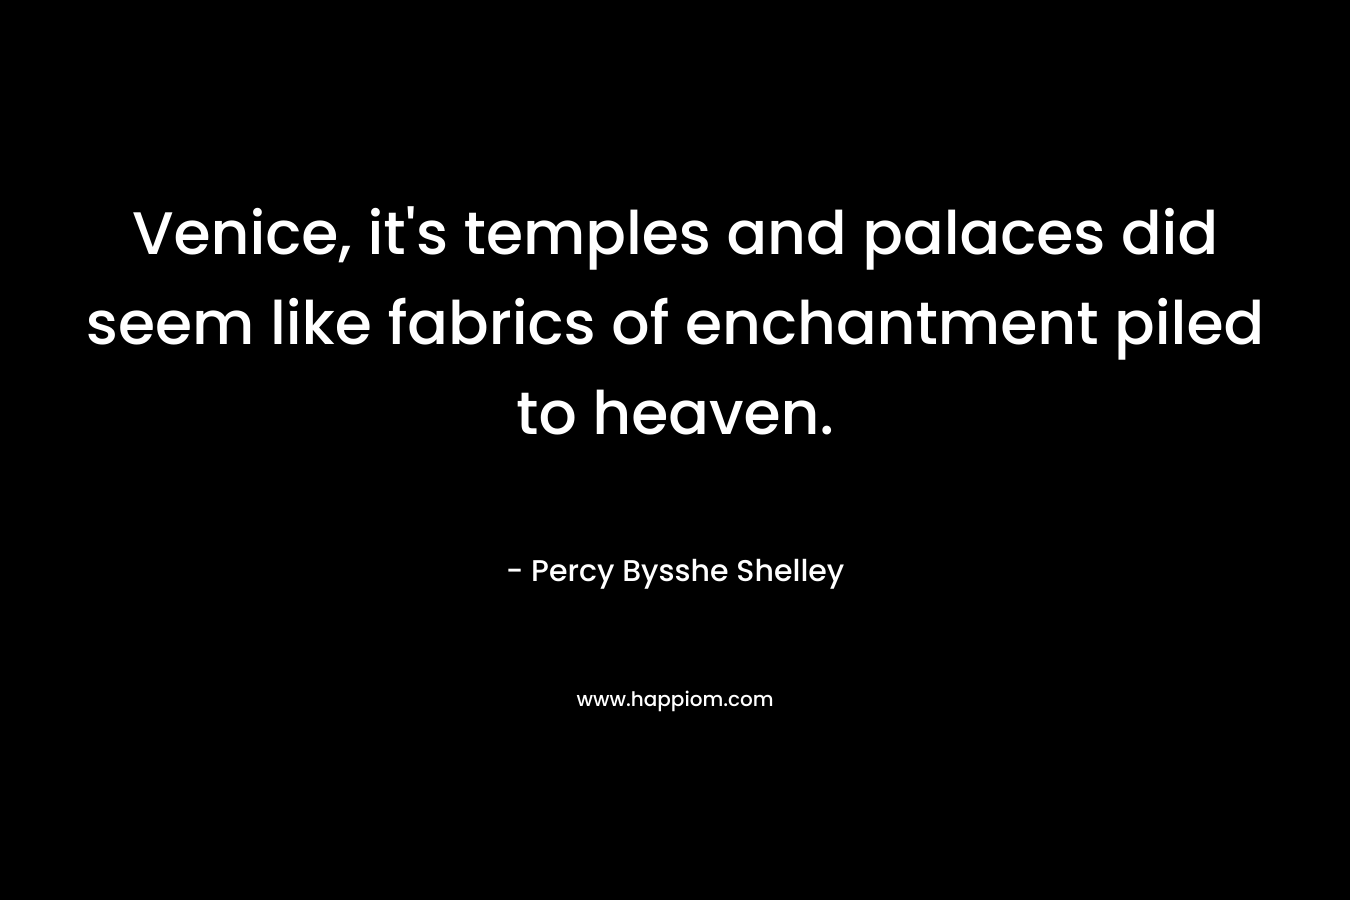 Venice, it’s temples and palaces did seem like fabrics of enchantment piled to heaven. – Percy Bysshe Shelley